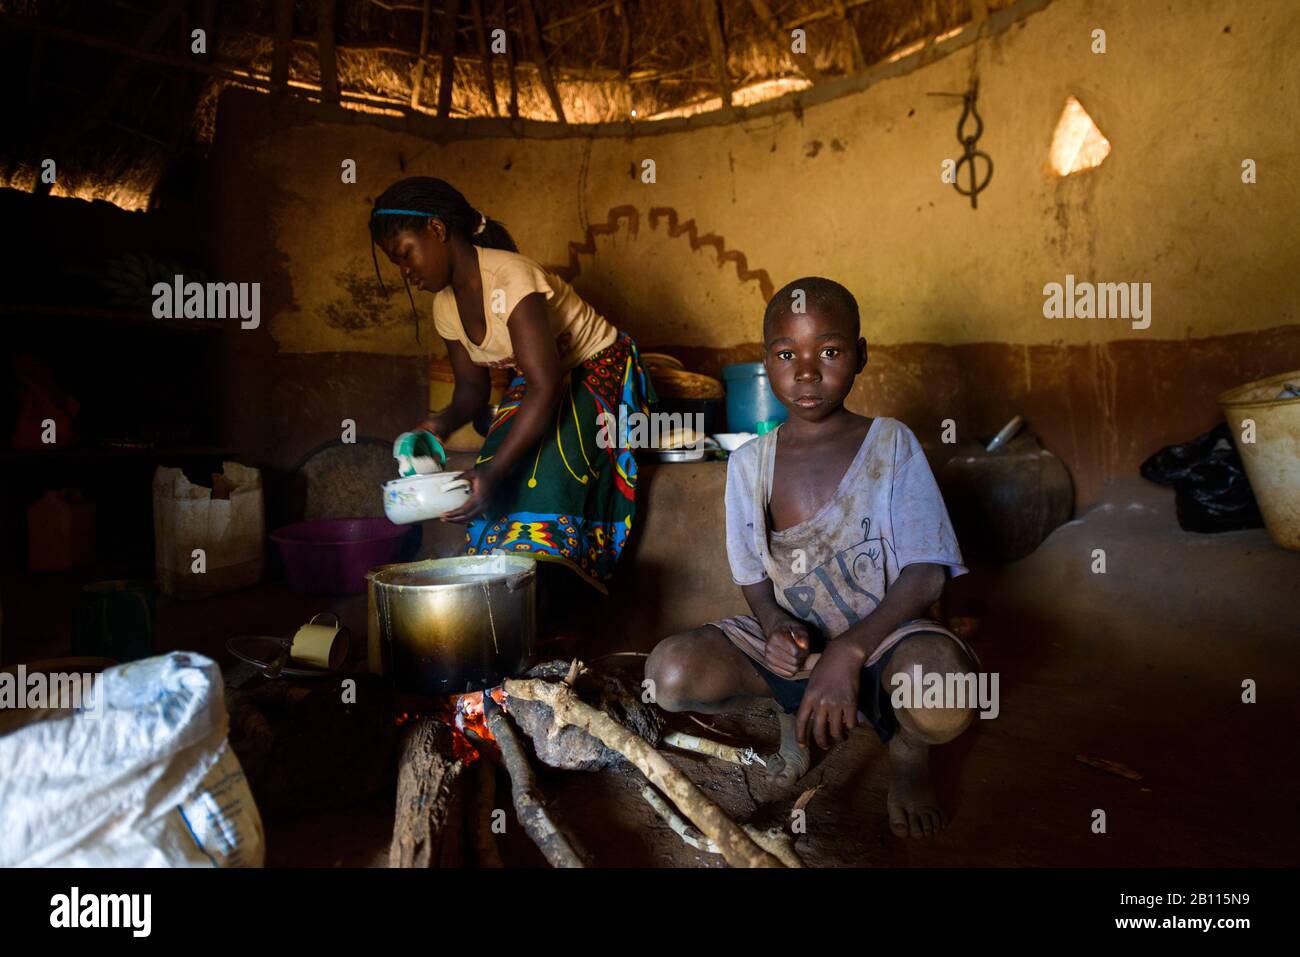 Everyday scene in a traditional straw hut, Mozambique, Africa Stock Photo